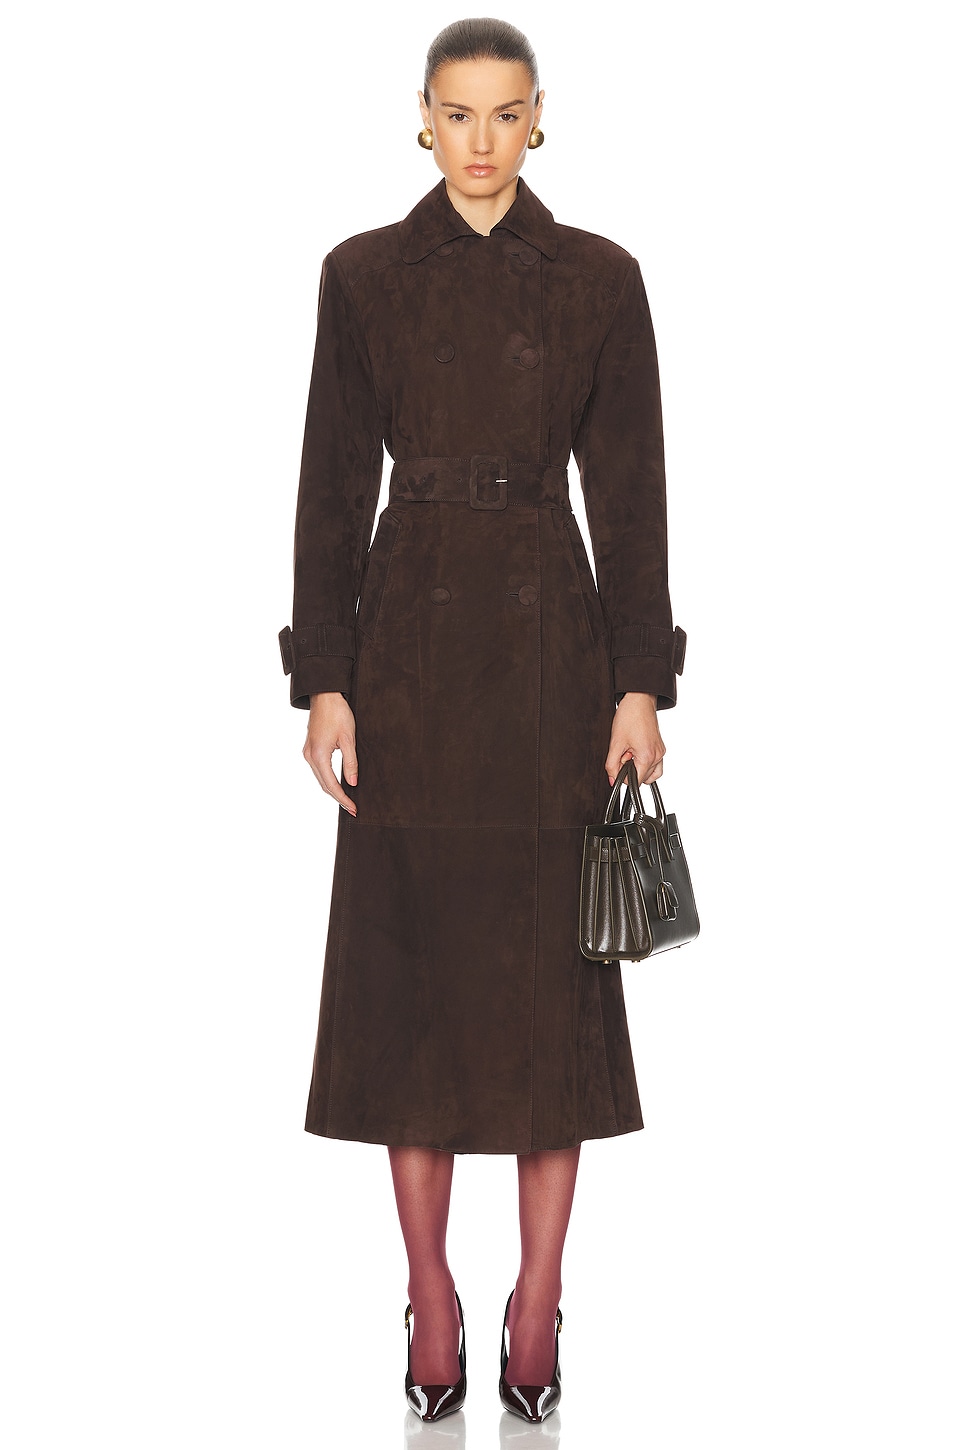 Nour Hammour Tate Suede Trench Coat In Mocha Suede